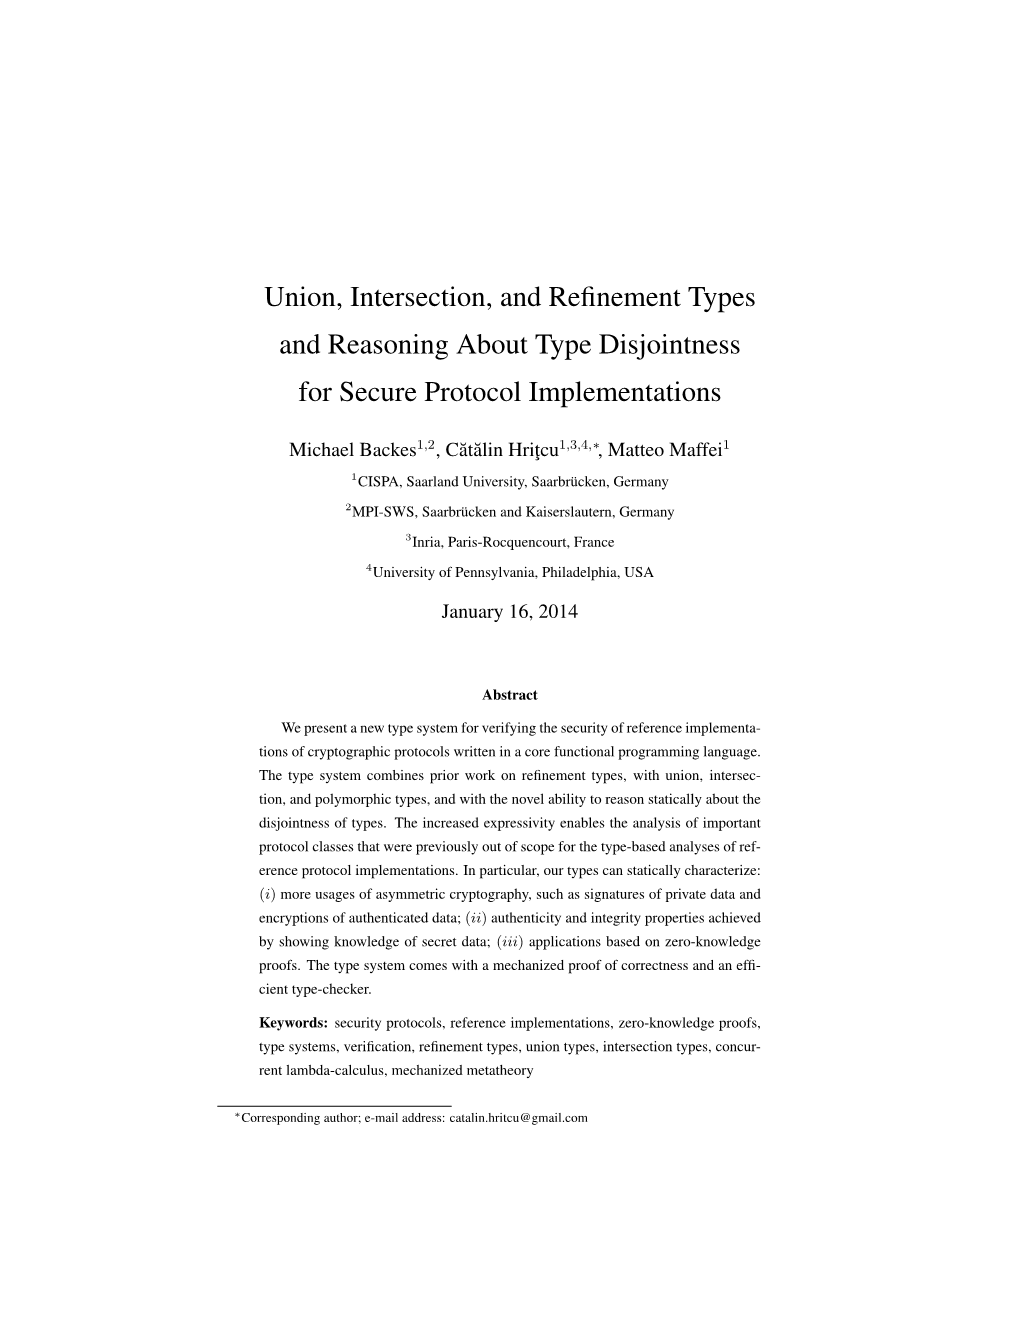 Union, Intersection, and Refinement Types and Reasoning About Type Disjointness for Secure Protocol Implementations